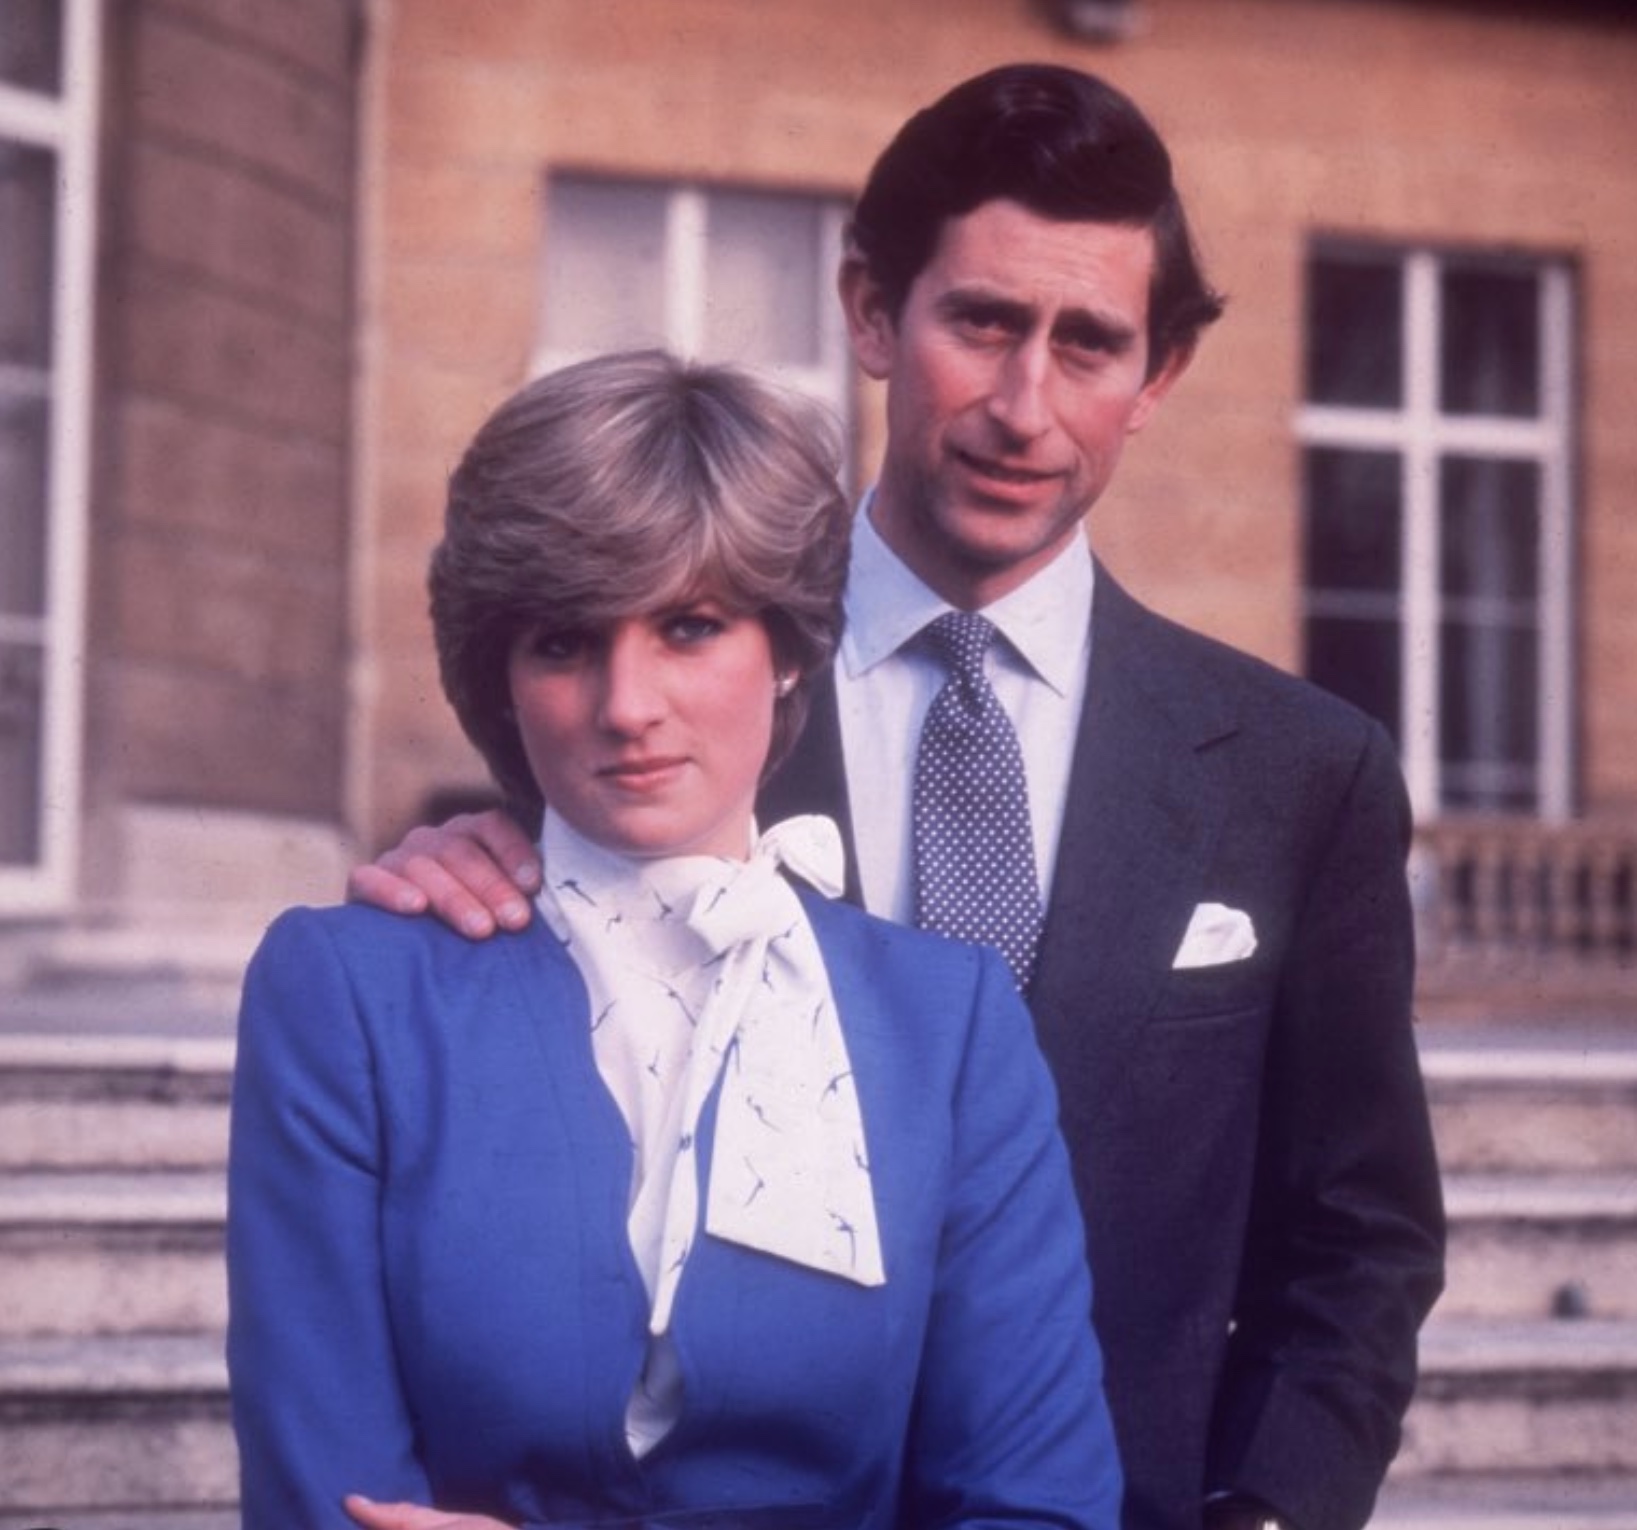 "Confusion and Surprise: How Charles' Unclear Response about Love Creates Stir during Diana's Engagement"